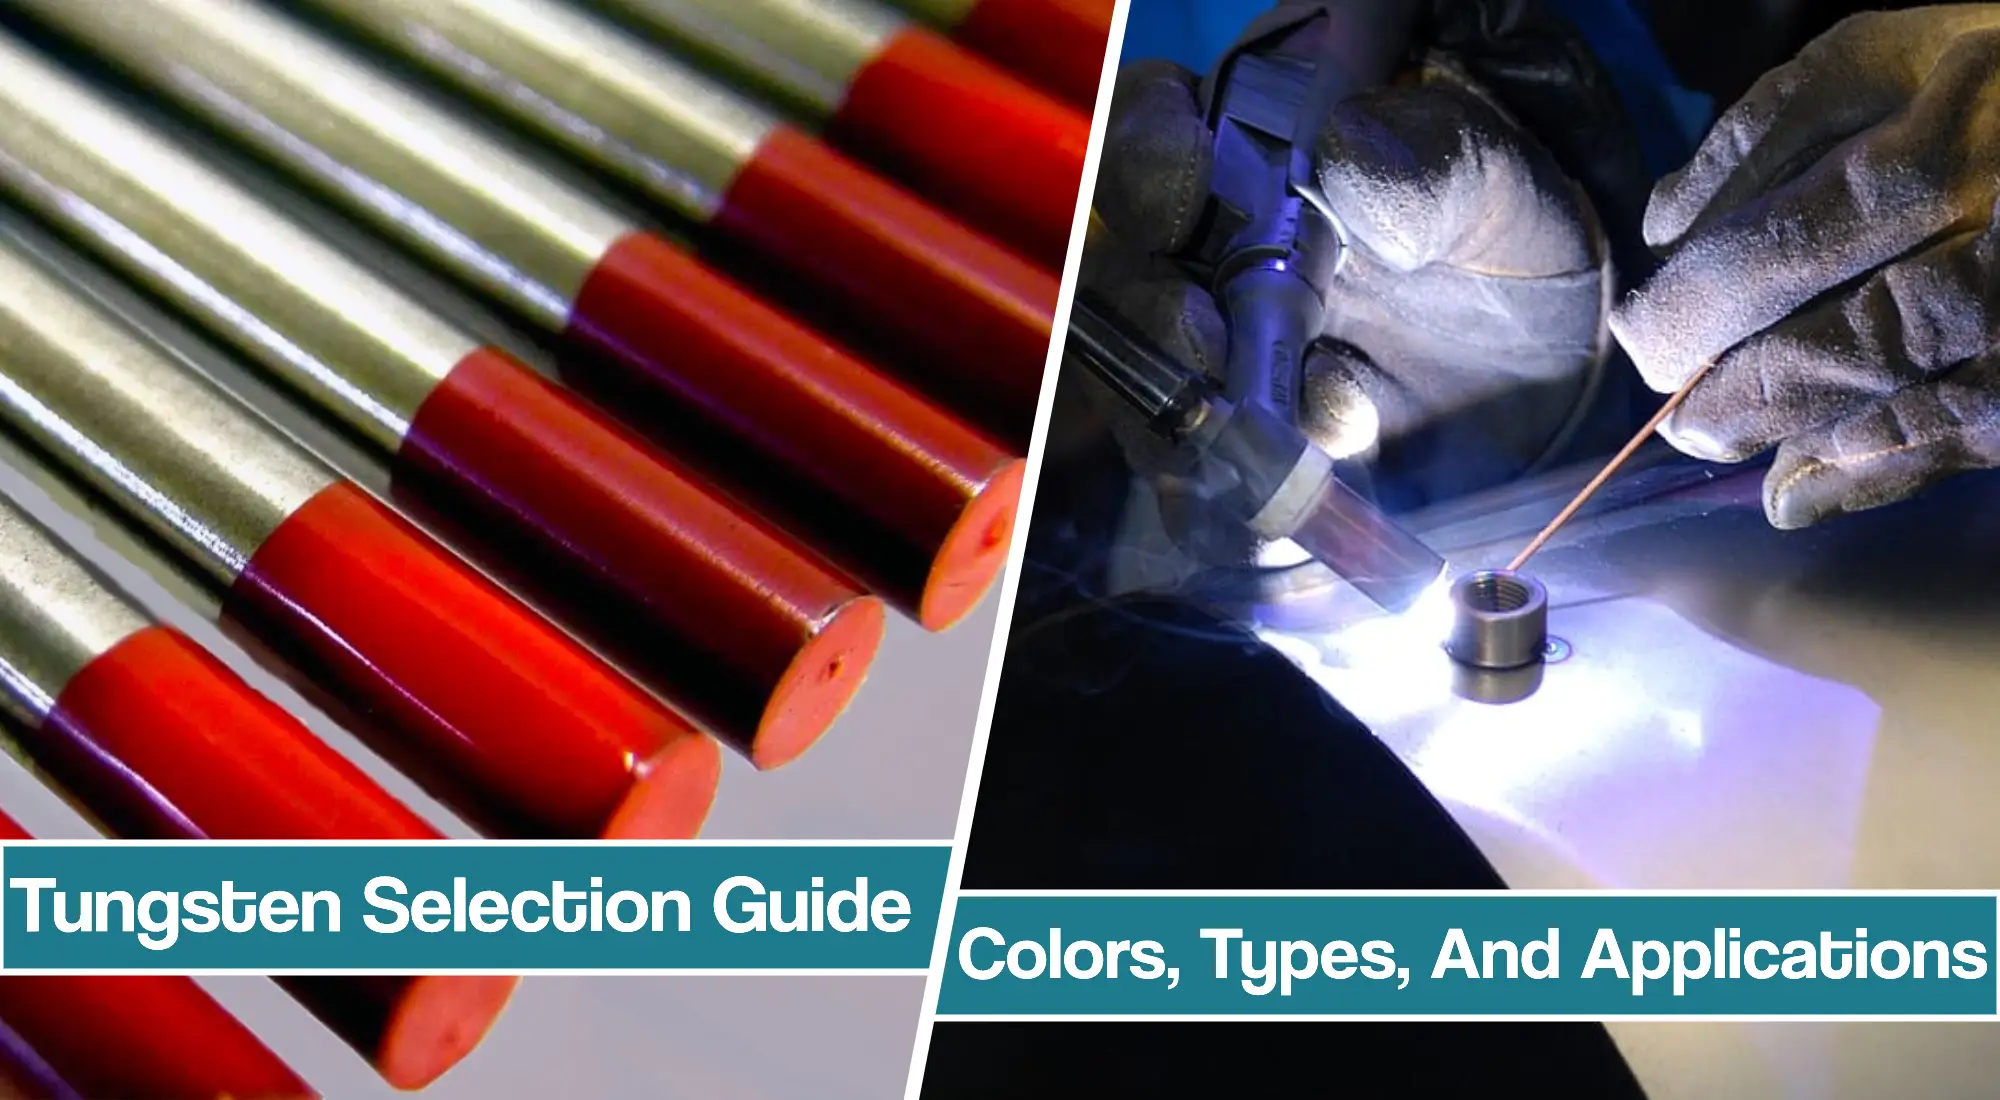 Tips for selecting tungsten Electrodes – What Do Different Colors and Types Represent [TIG Welding]